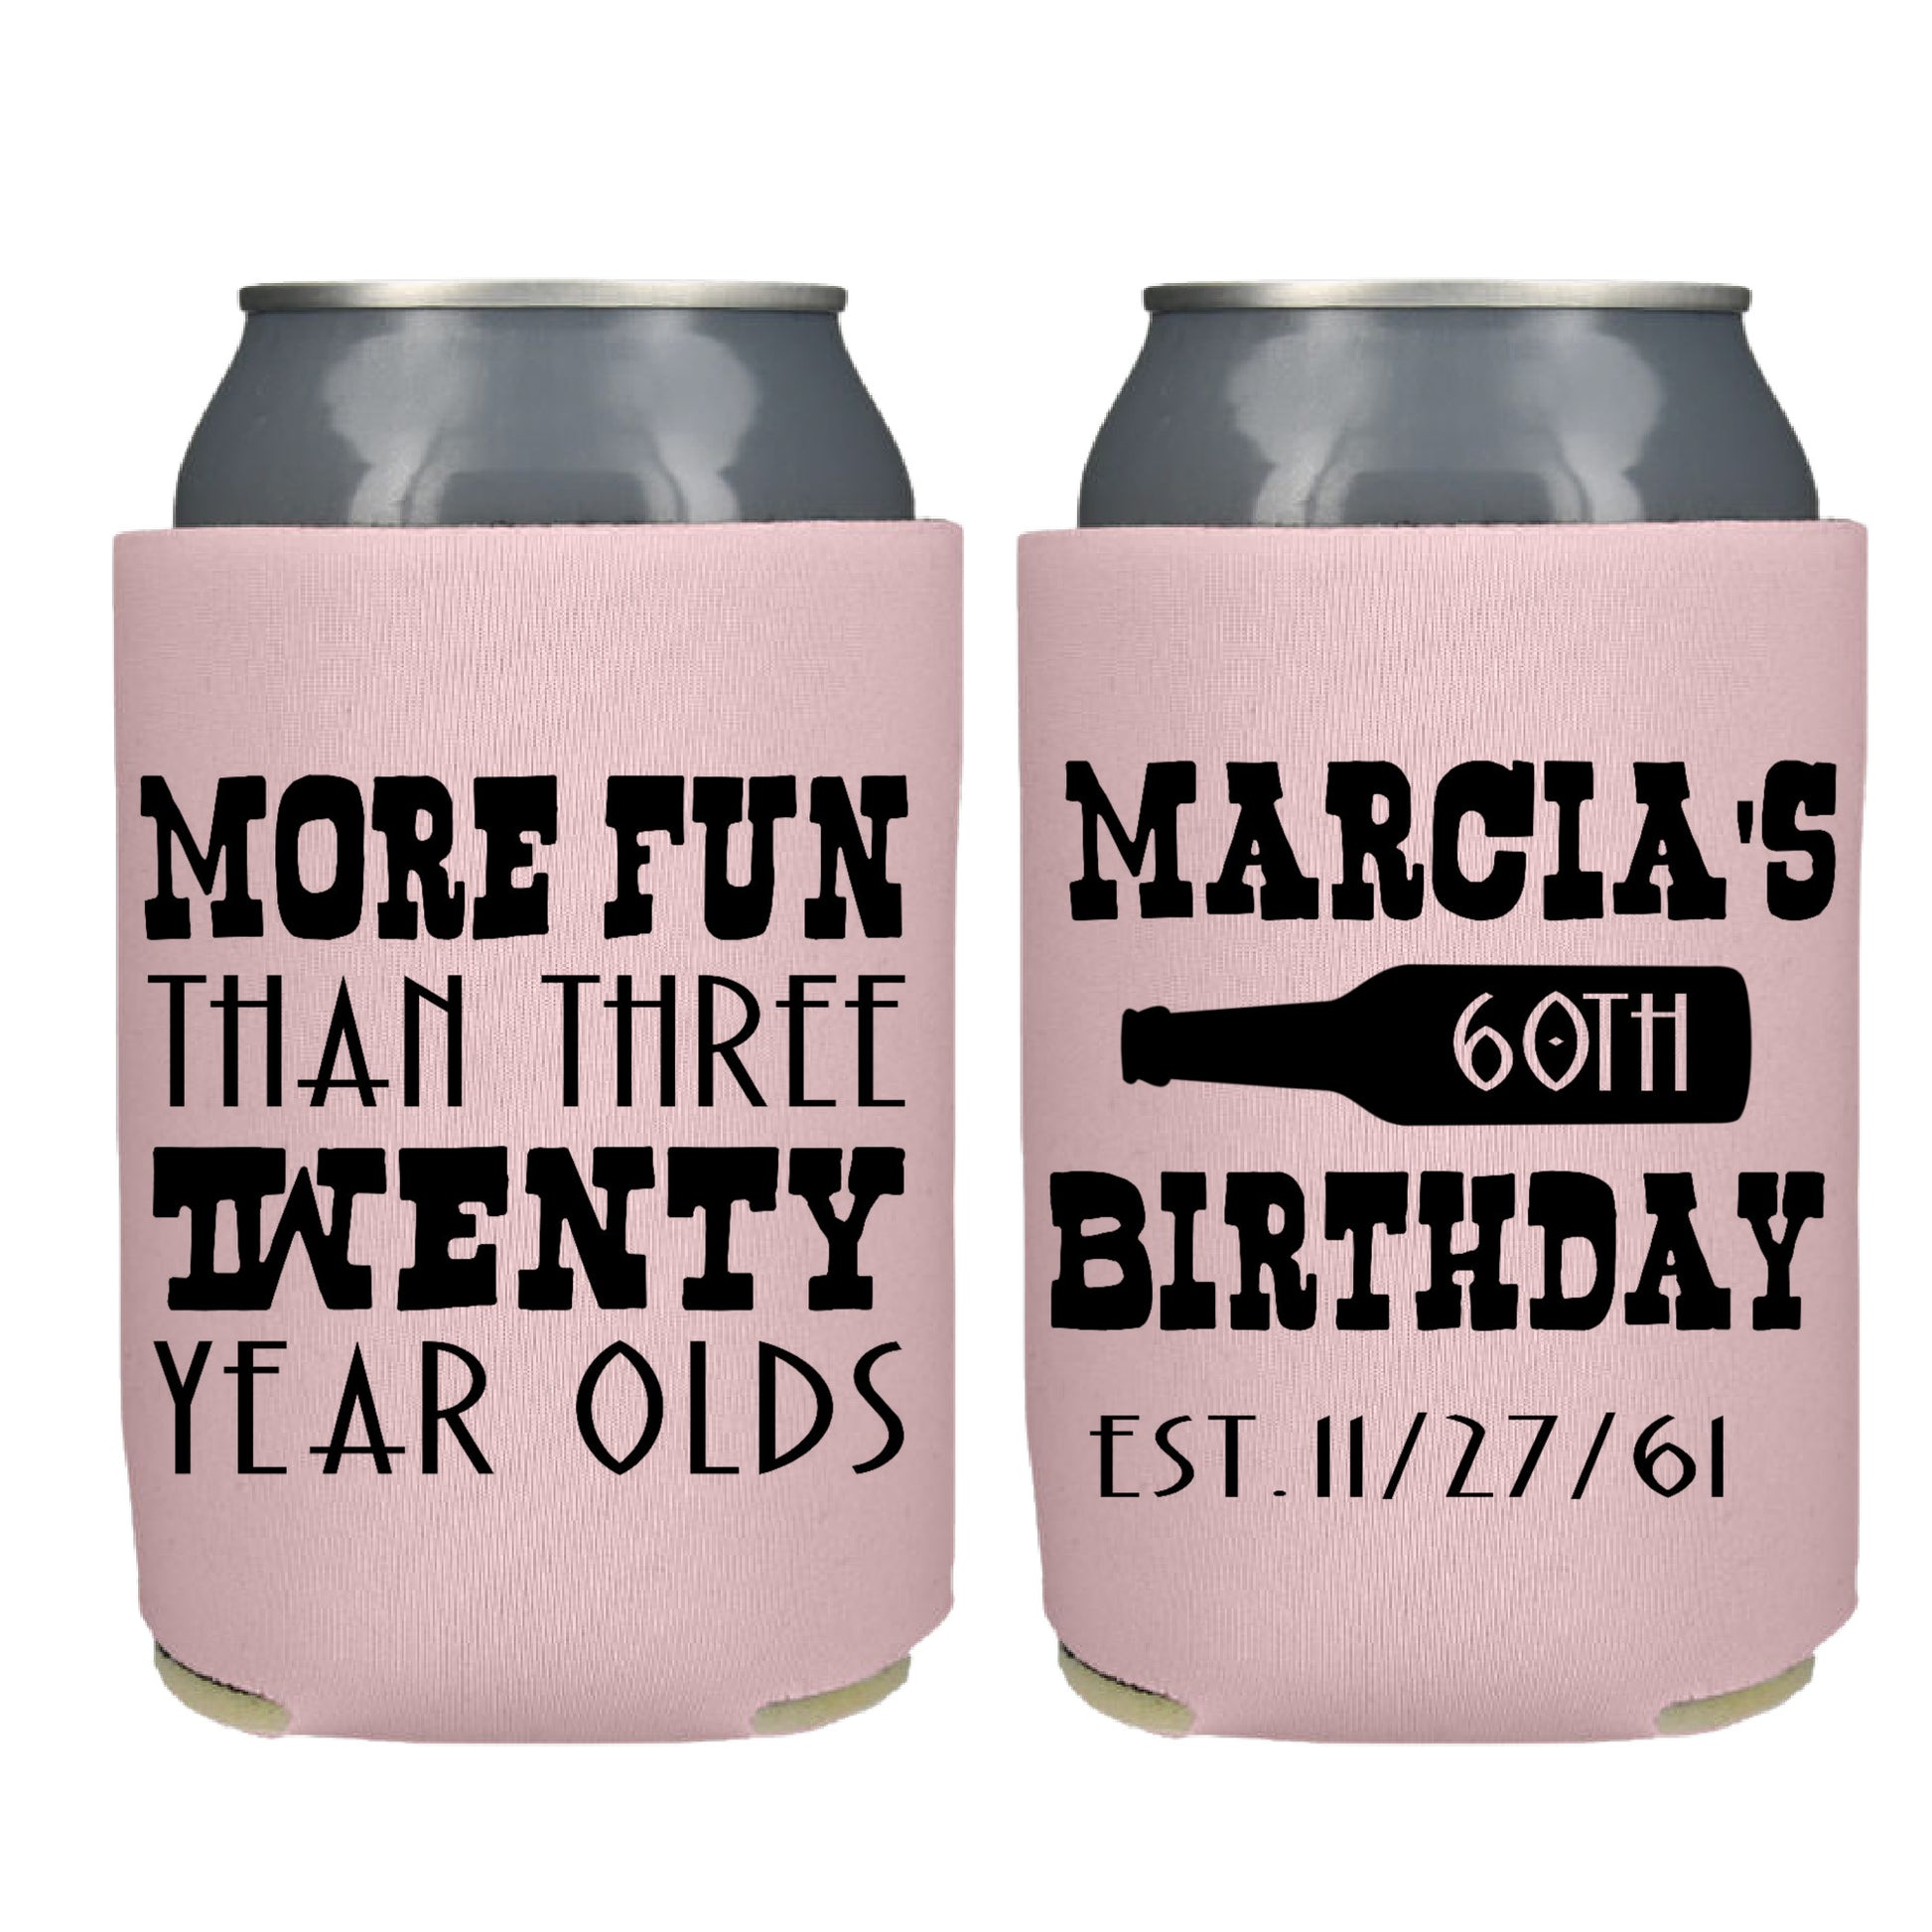 More Fun Than Three Twenty Year Olds Screen Printed Can Cooler freeshipping - Be Vocal Designs